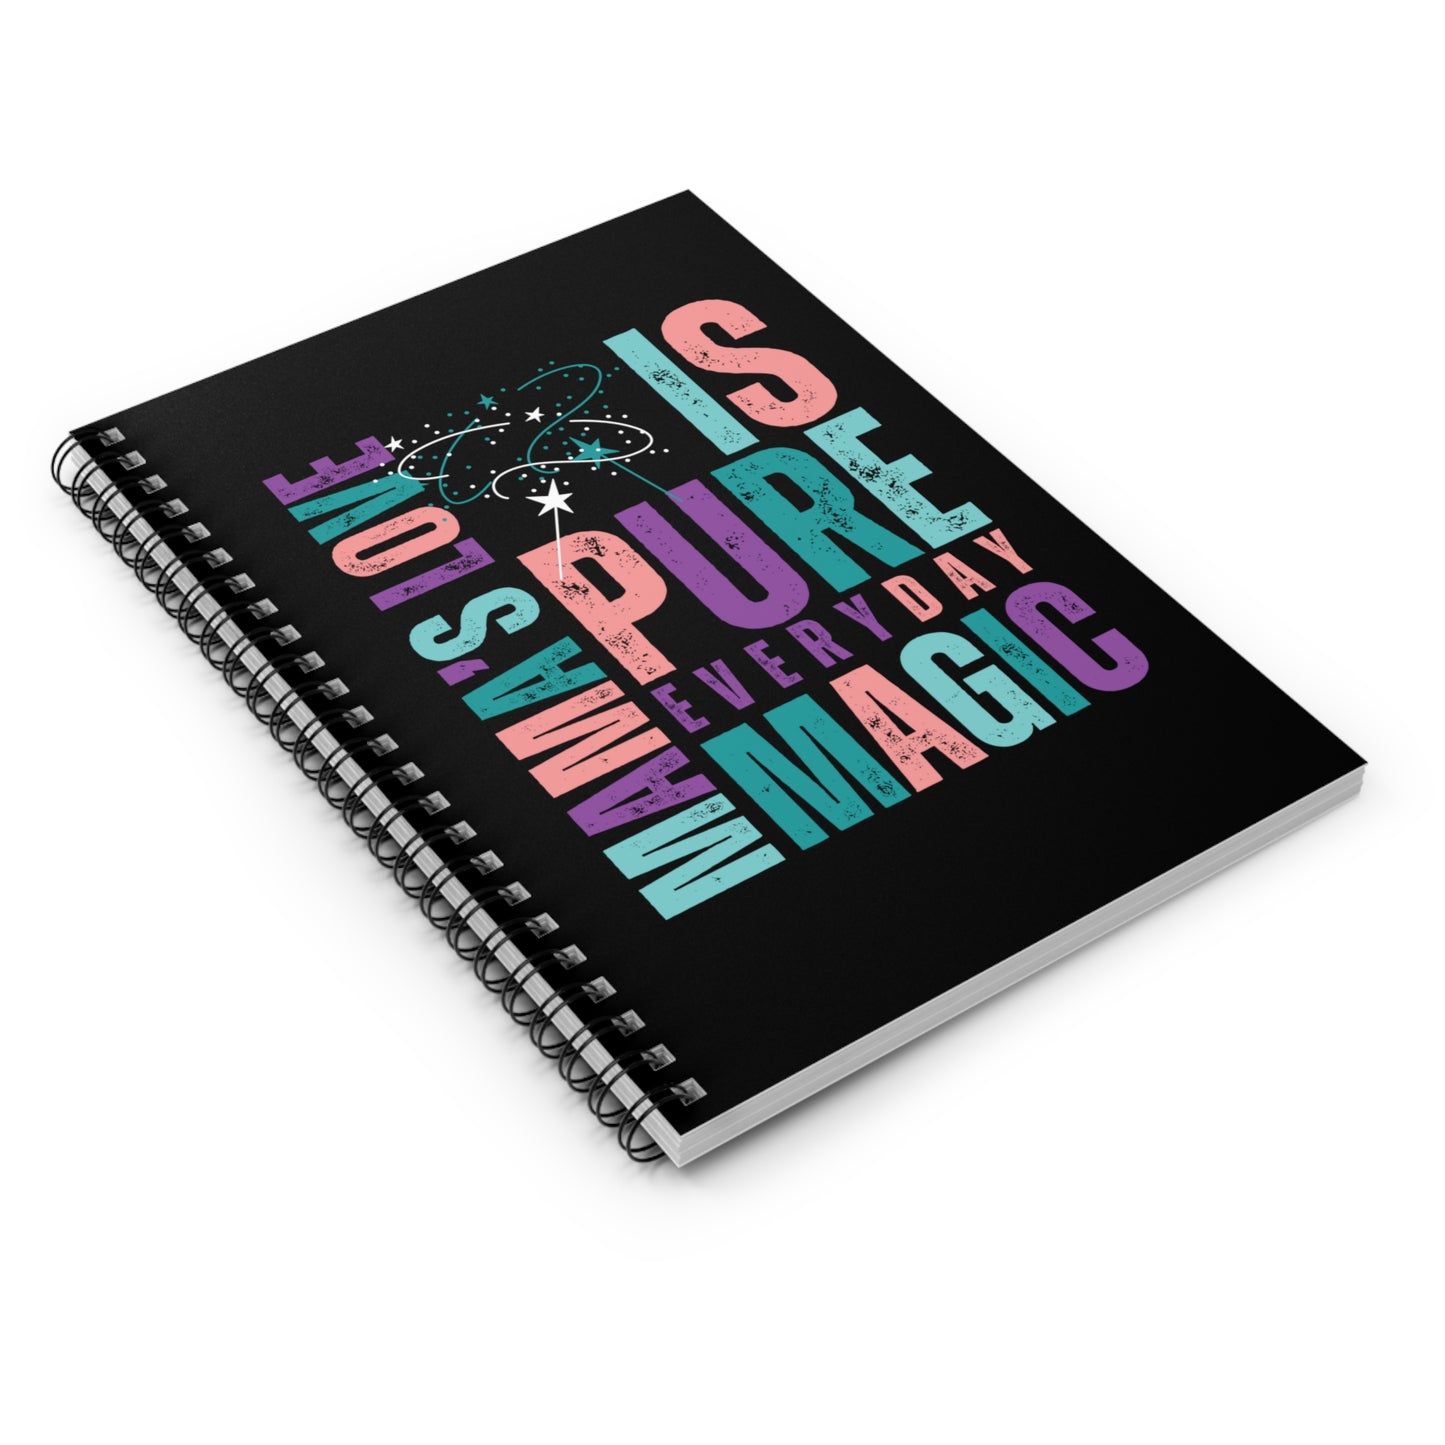 Mama's Love Everyday Magic Spiral Notebook - Ruled Line with Arm Detail - Eddy and Rita